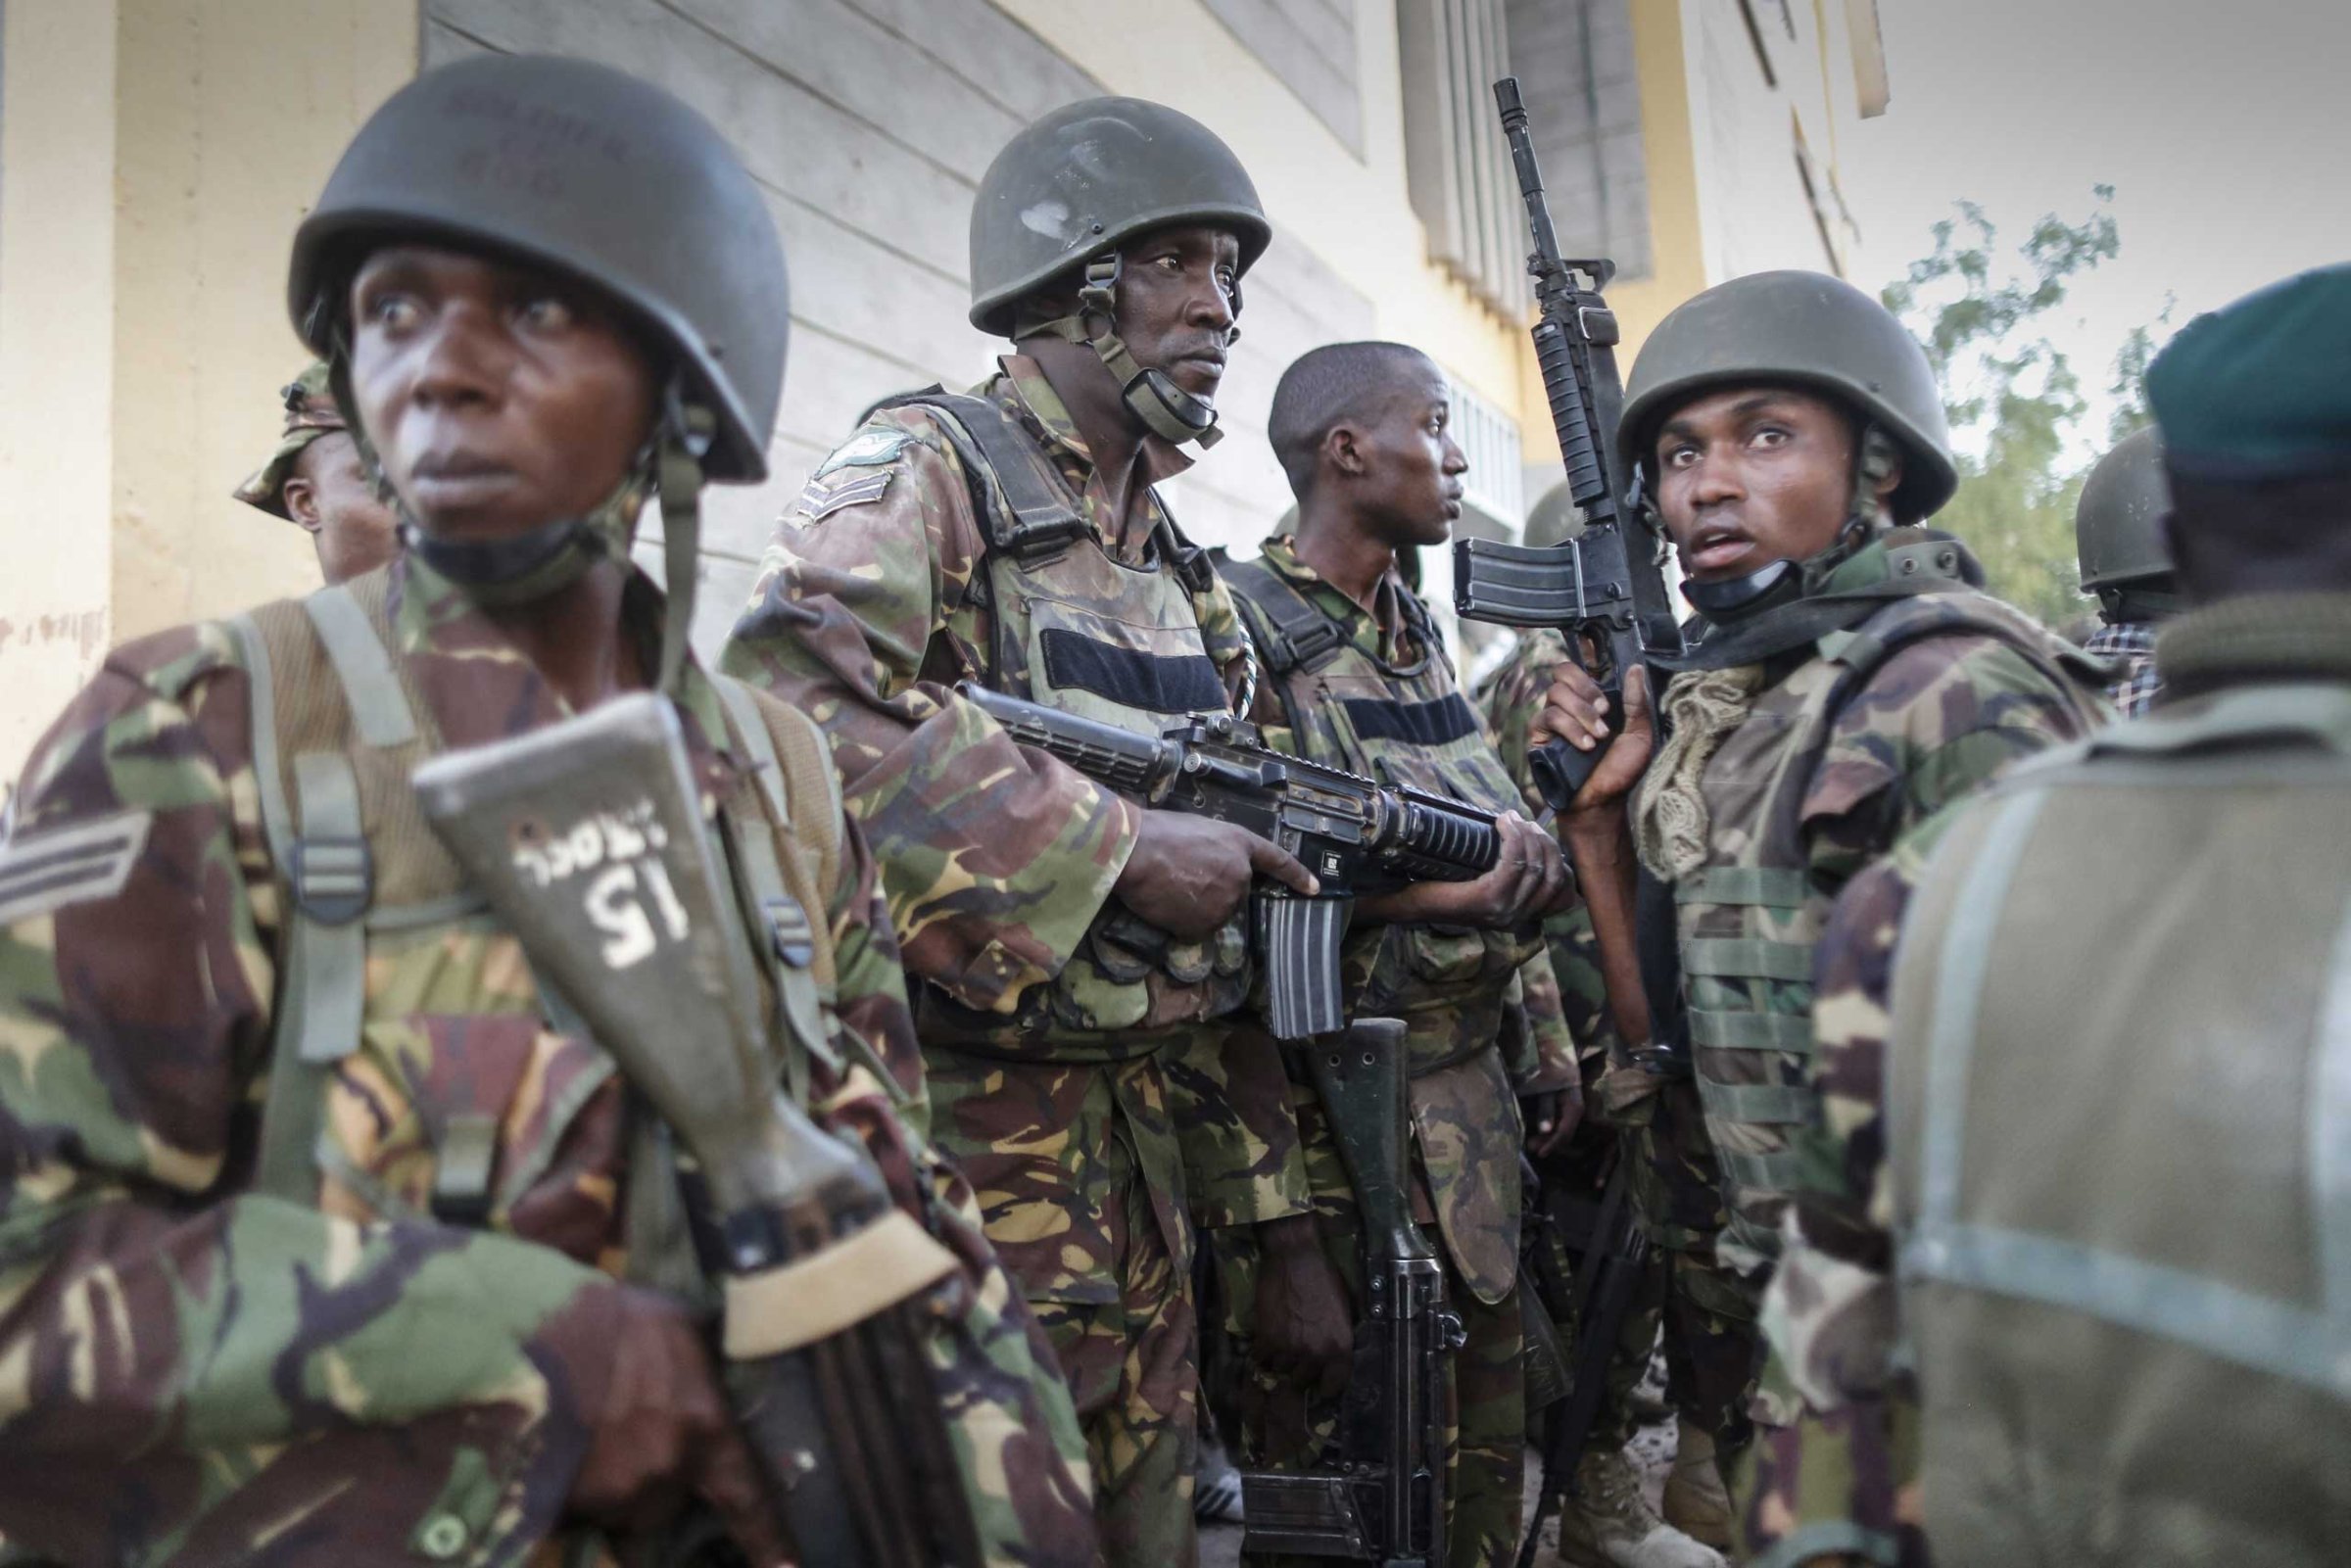 Kenyan soldiers prepare to sweep a building at Garissa University College after gunmen attacked the campus, in northeastern Kenya, on April 2, 2015.